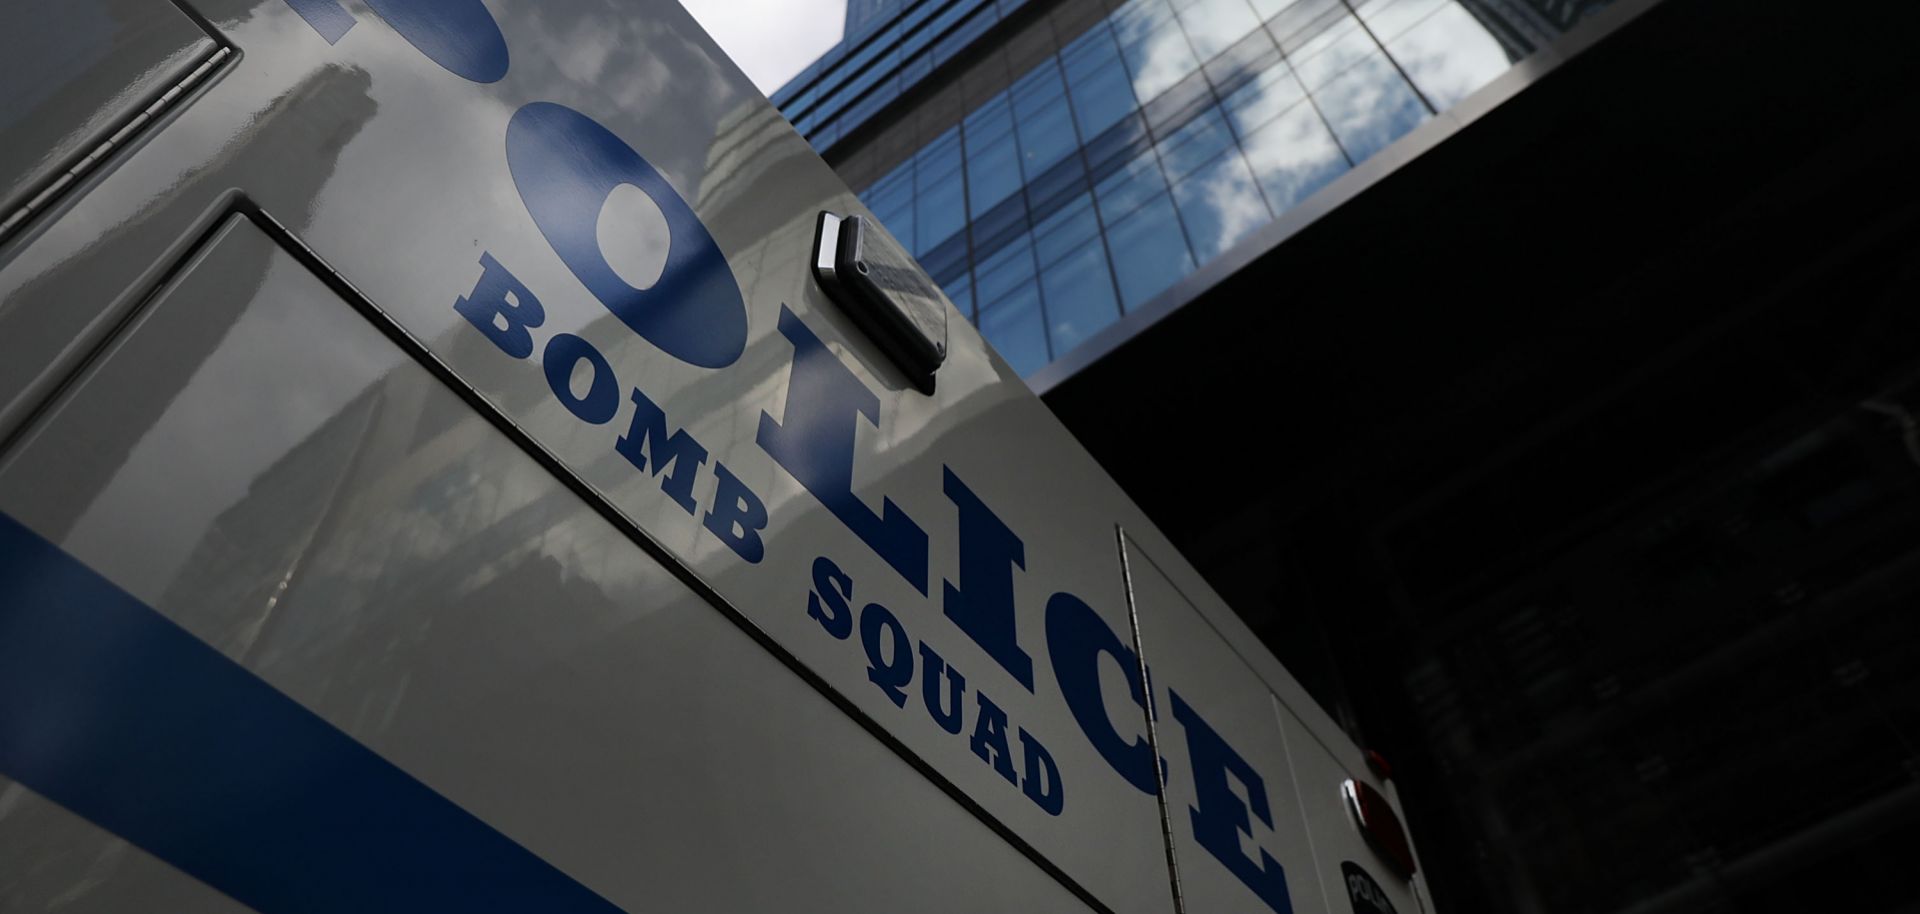 A New York bomb squad van deployed outside of the Time Warner Center after an explosive device was found on the morning of Oct. 24 in New York City. 